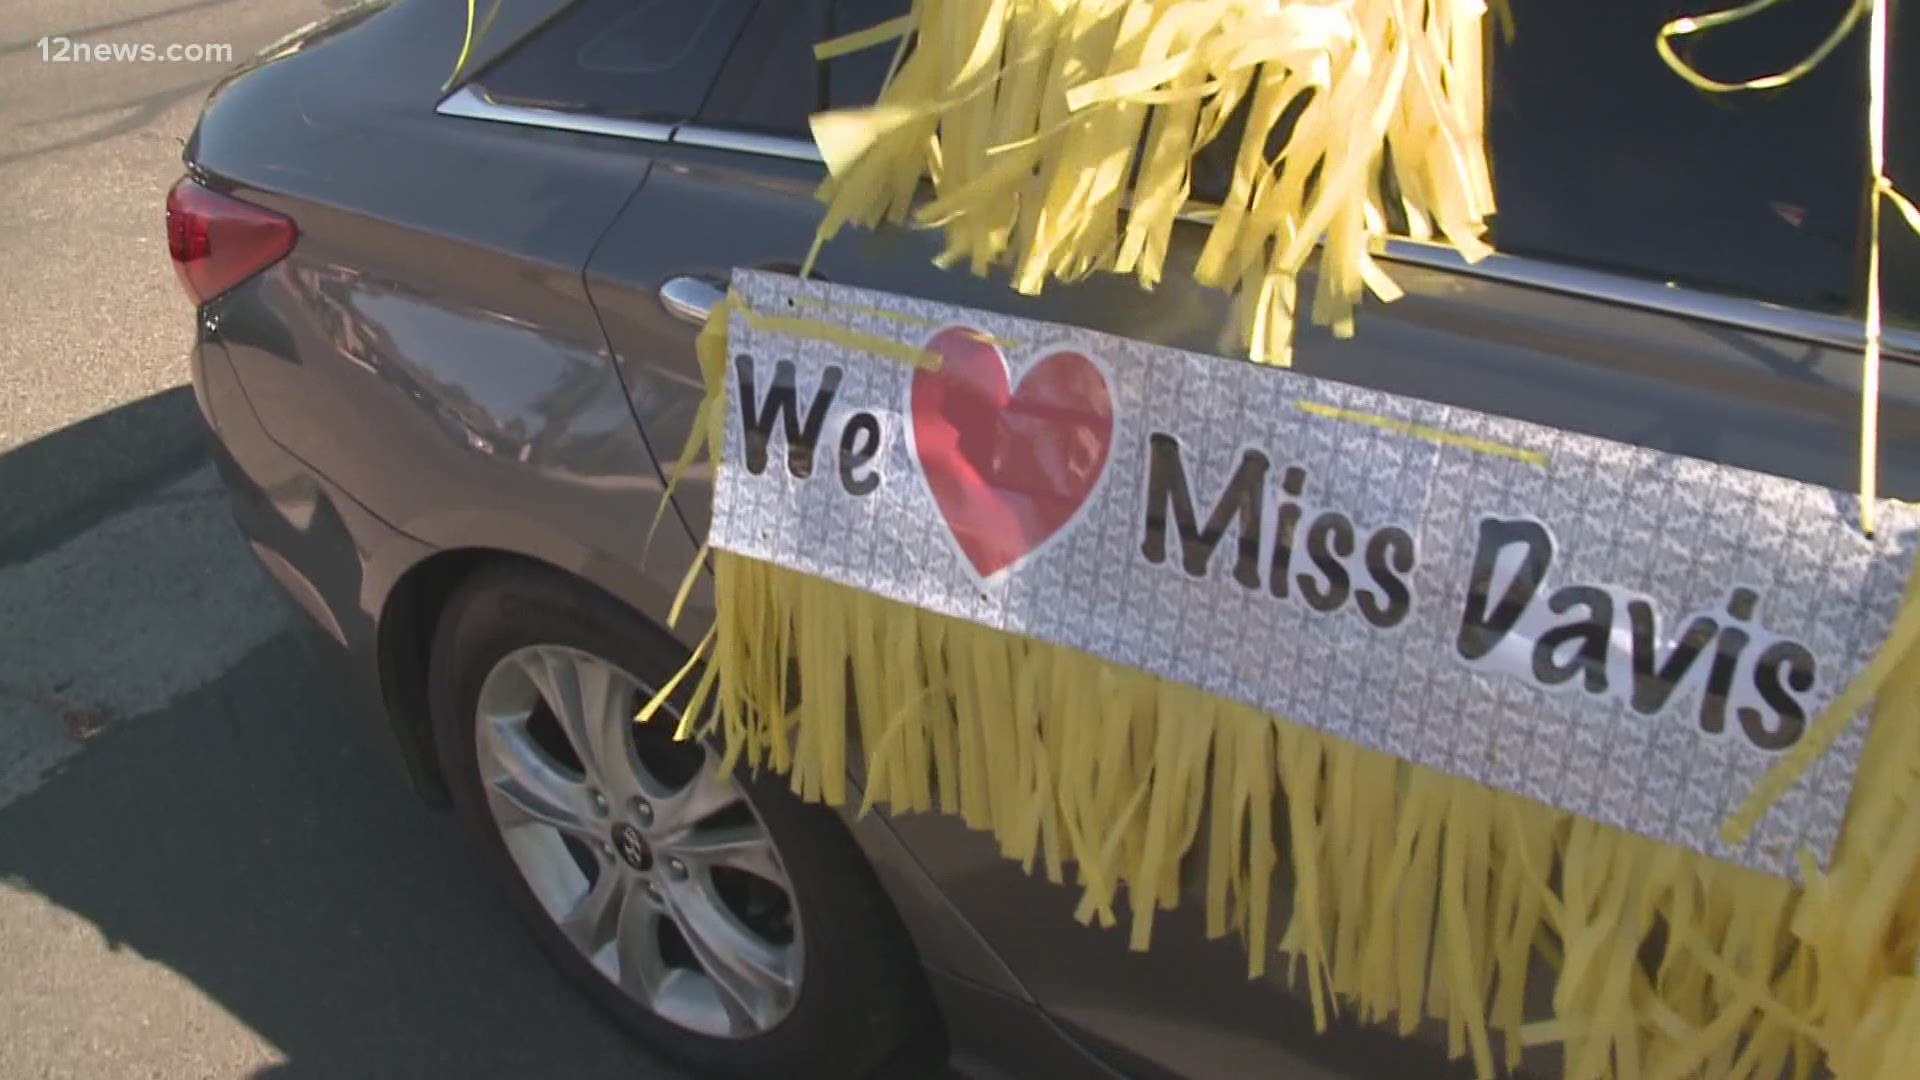 At Apollo High School, the teacher that's impacted most lives is Cristi Davis. After 4+ decades of teaching science, she got a parade to celebrate her retirement.